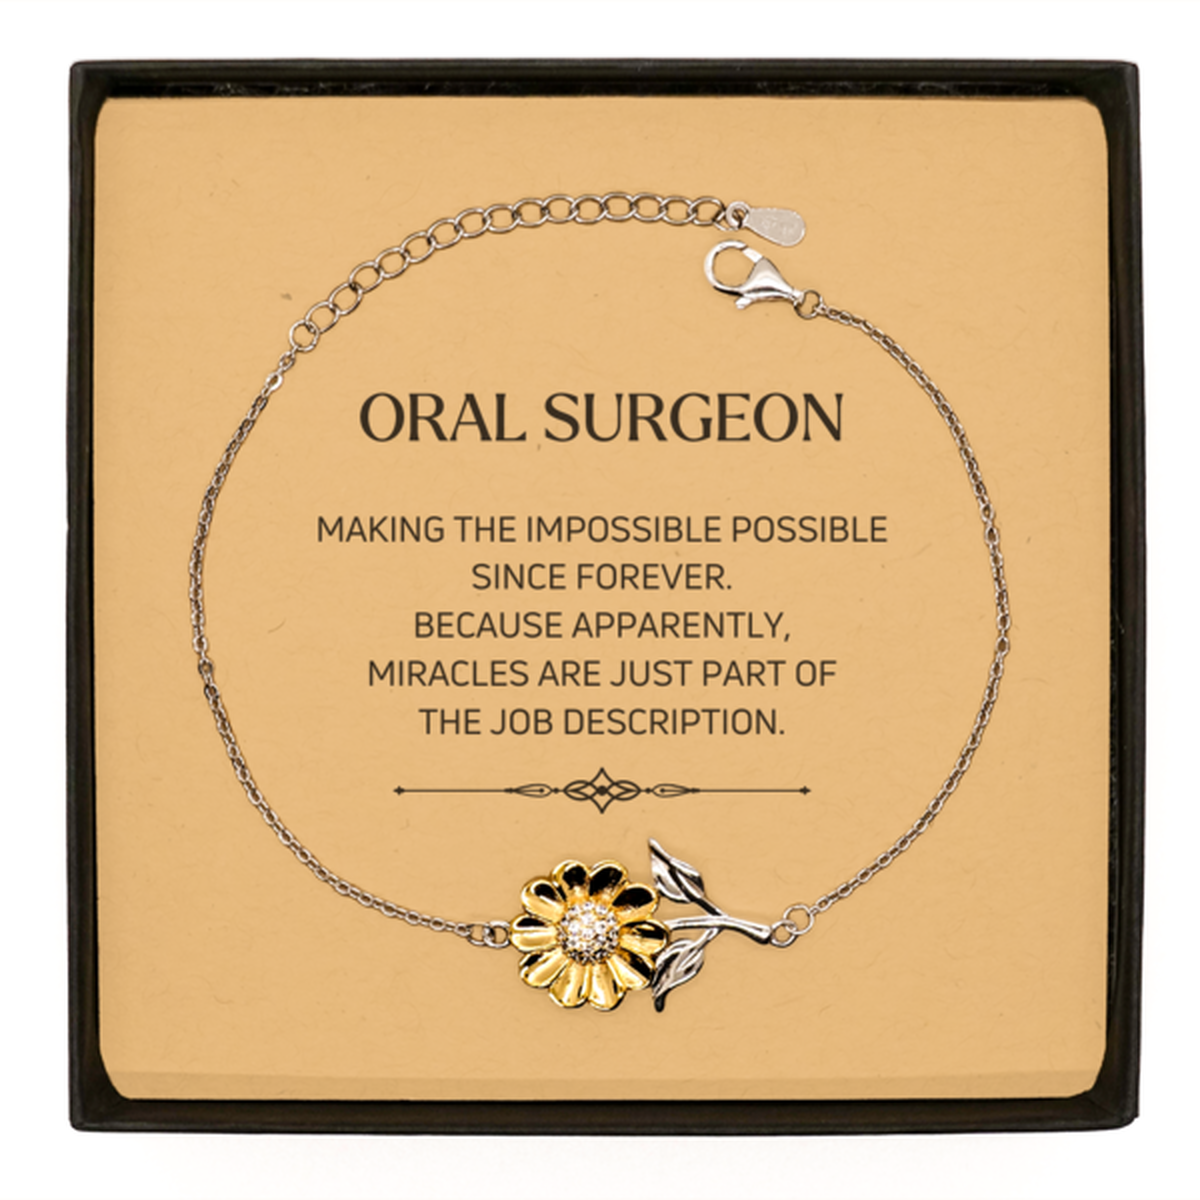 Funny Oral Surgeon Gifts, Miracles are just part of the job description, Inspirational Birthday Sunflower Bracelet For Oral Surgeon, Men, Women, Coworkers, Friends, Boss